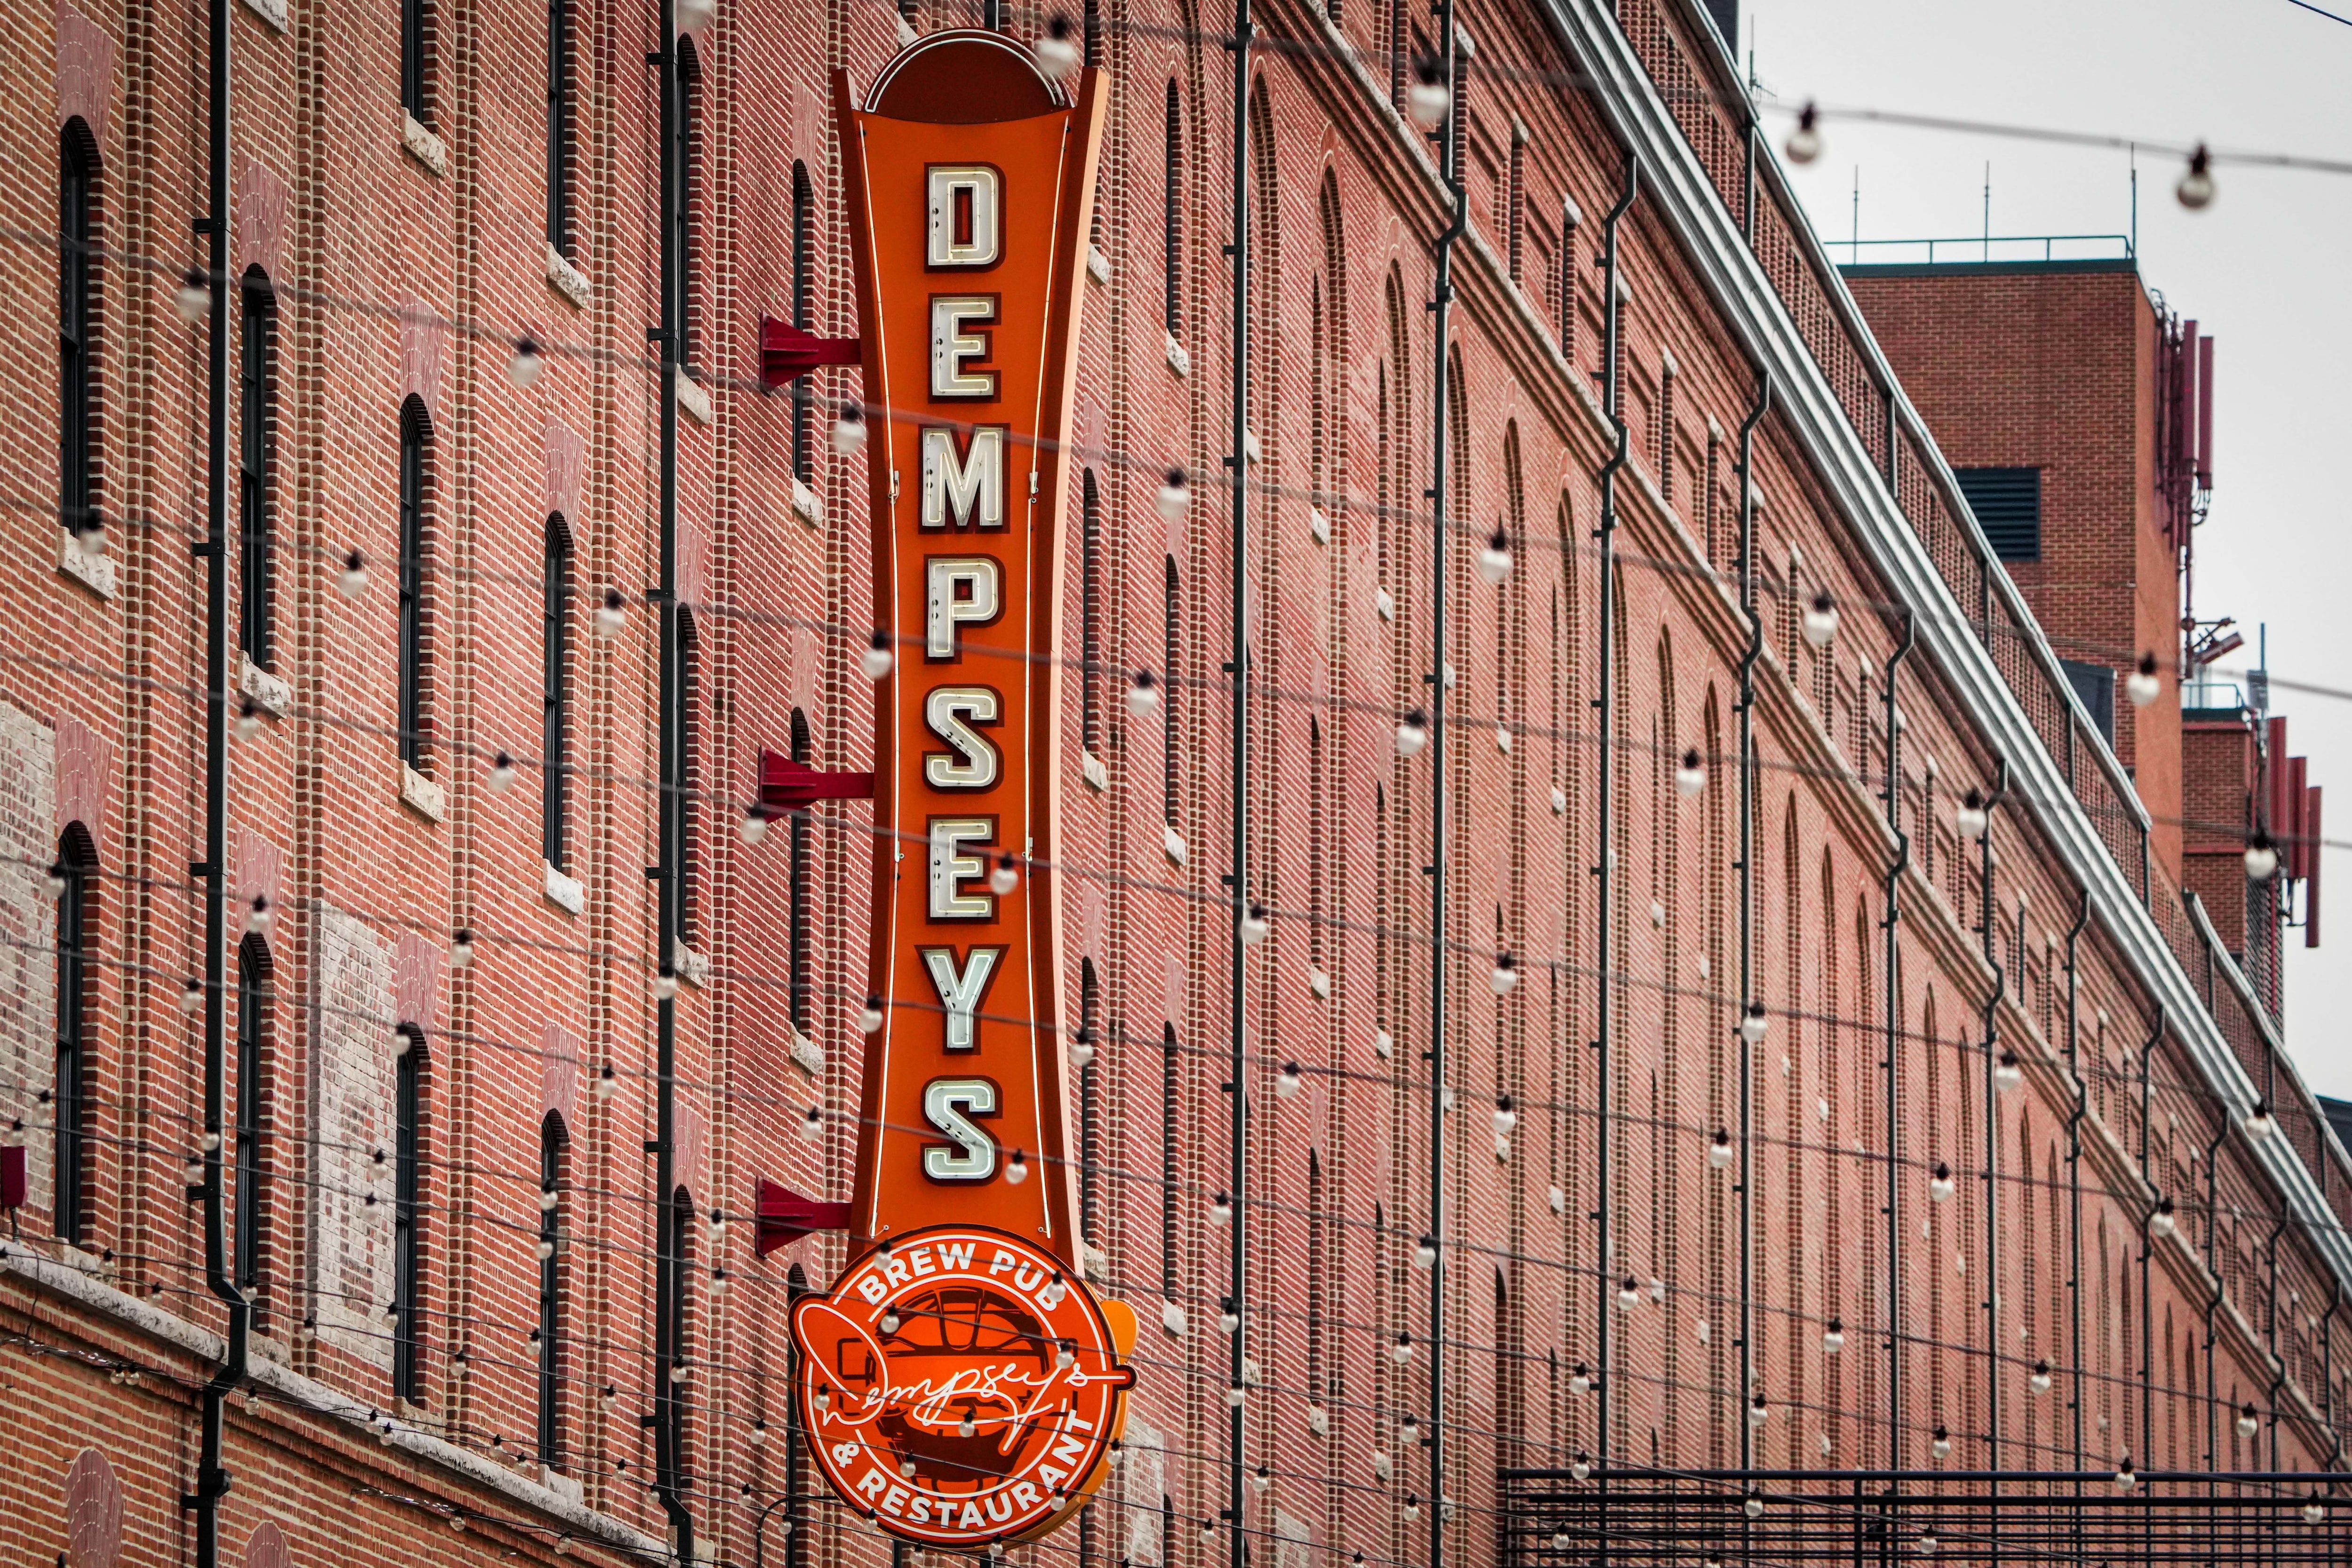 Orioles replacing Dempsey's with SuperBook Bar and Restaurant